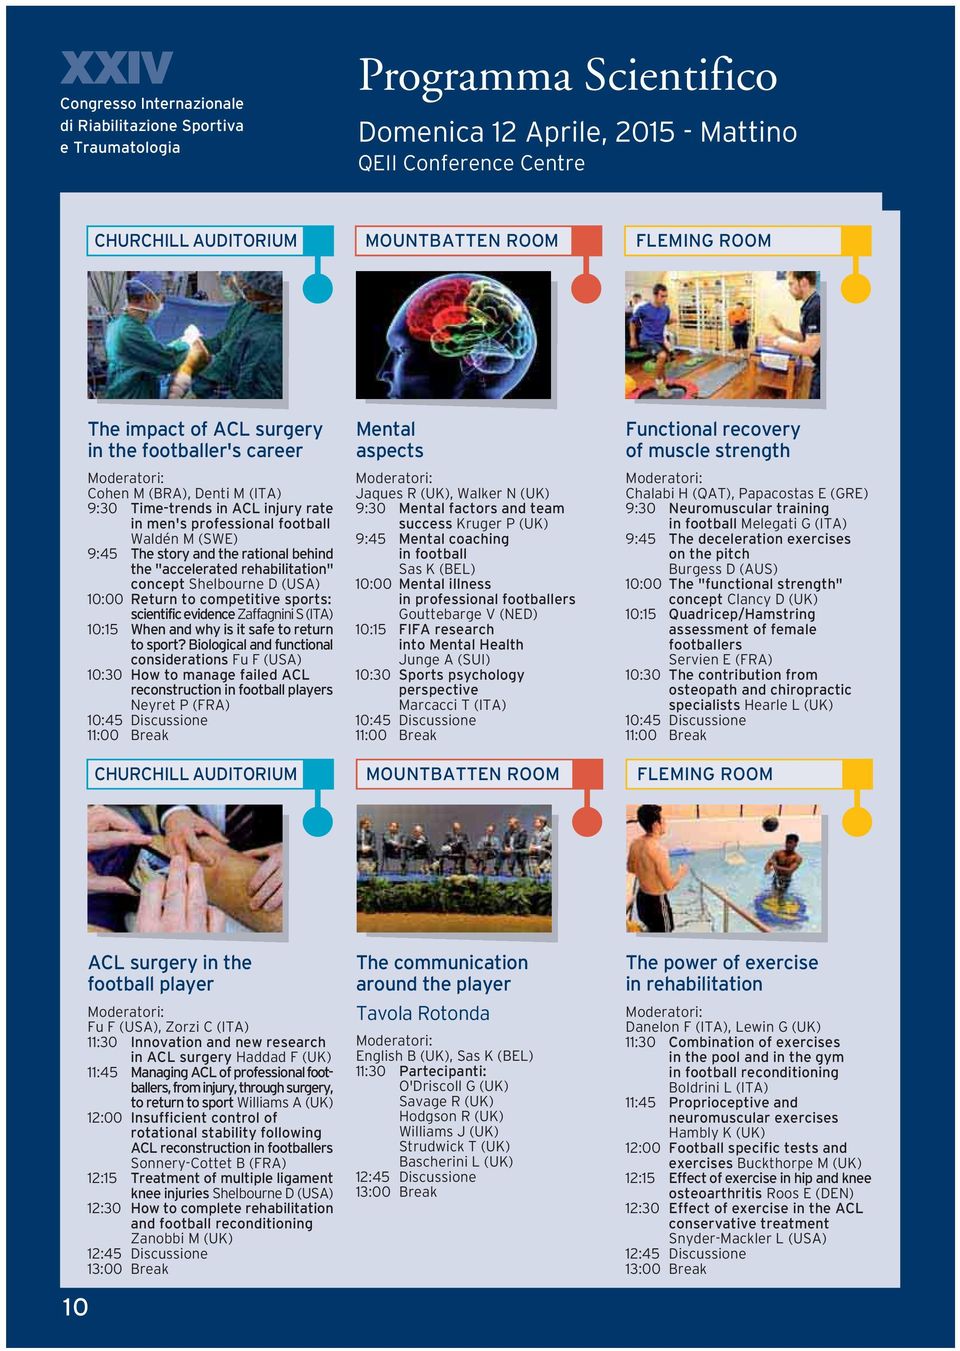 behind the "accelerated rehabilitation" concept Shelbourne D (USA) 10:00 Return to competitive sports: scientific evidence Zaffagnini S (ITA) 10:15 When and why is it safe to return to sport?